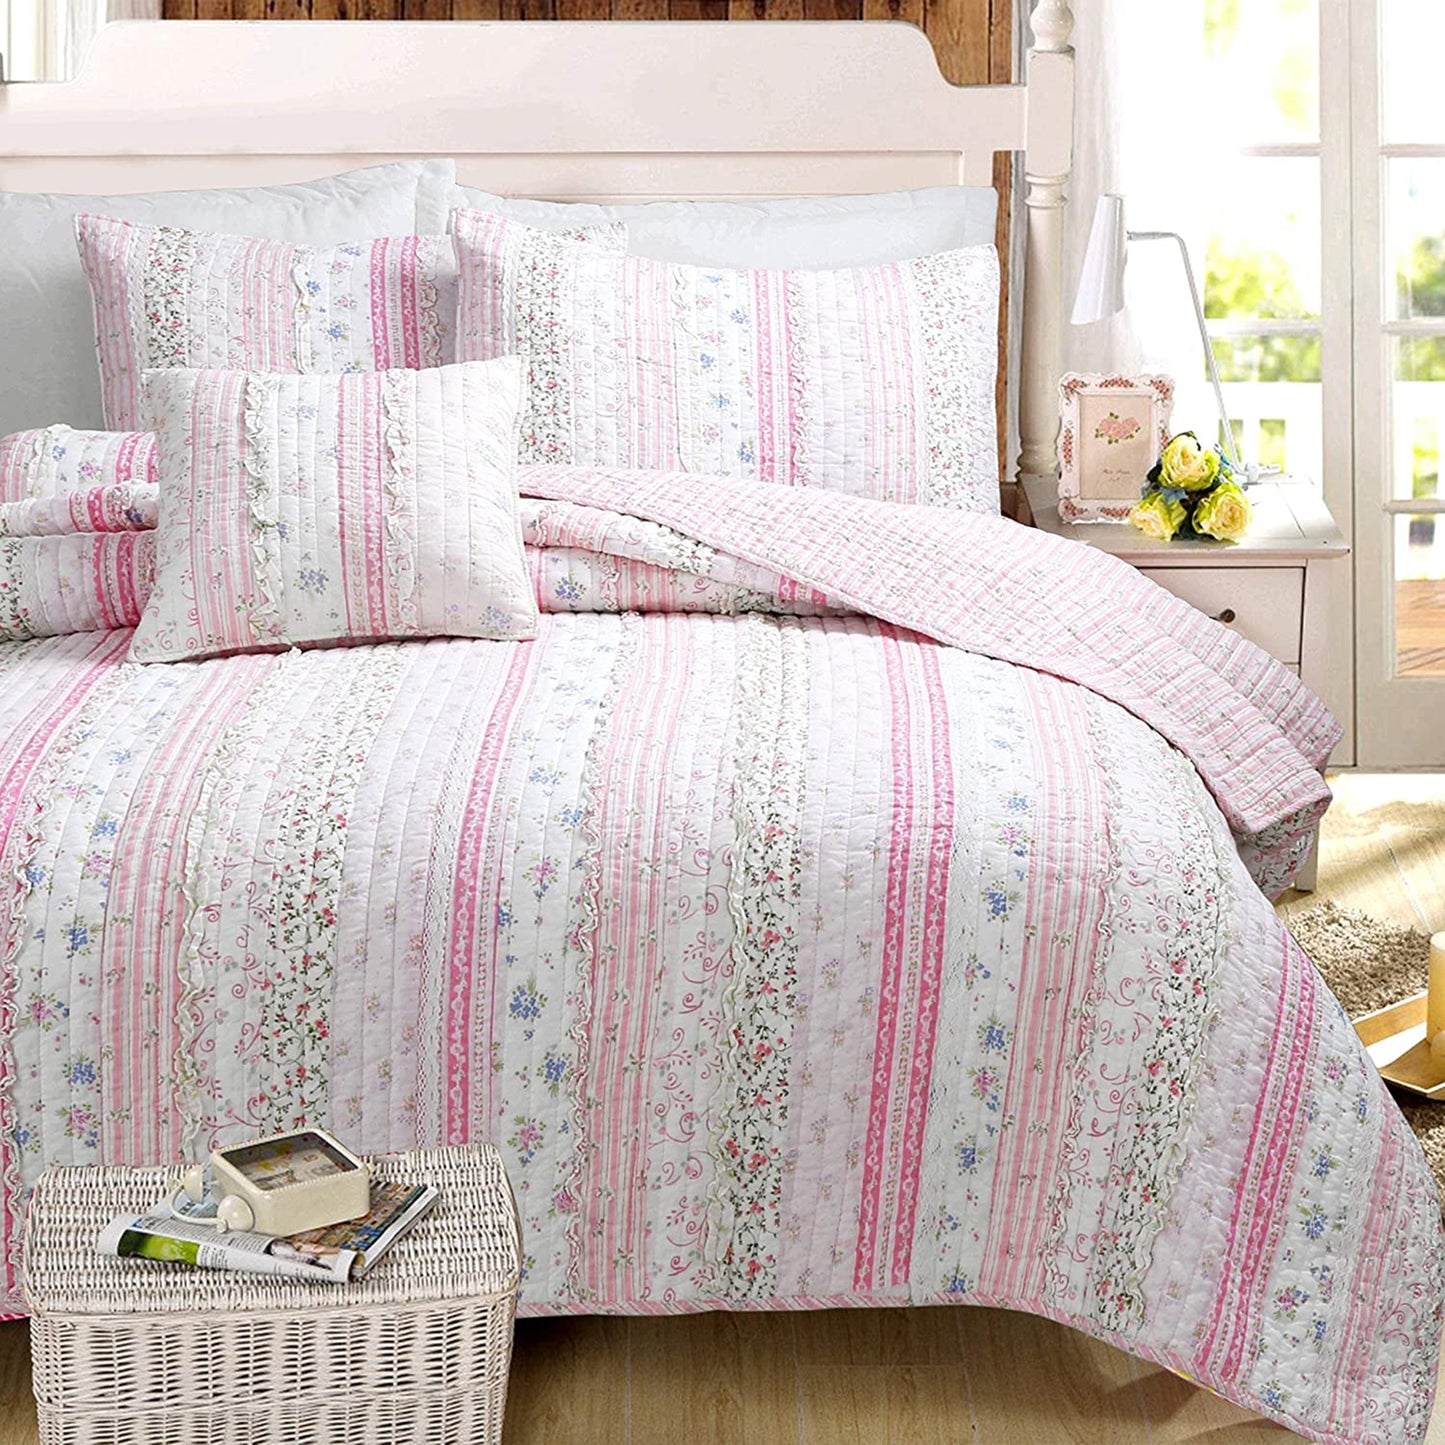 Romantic Chic Lace Ruffle Pink Real Patchwork Cotton Reversible Quilt Bedding Set